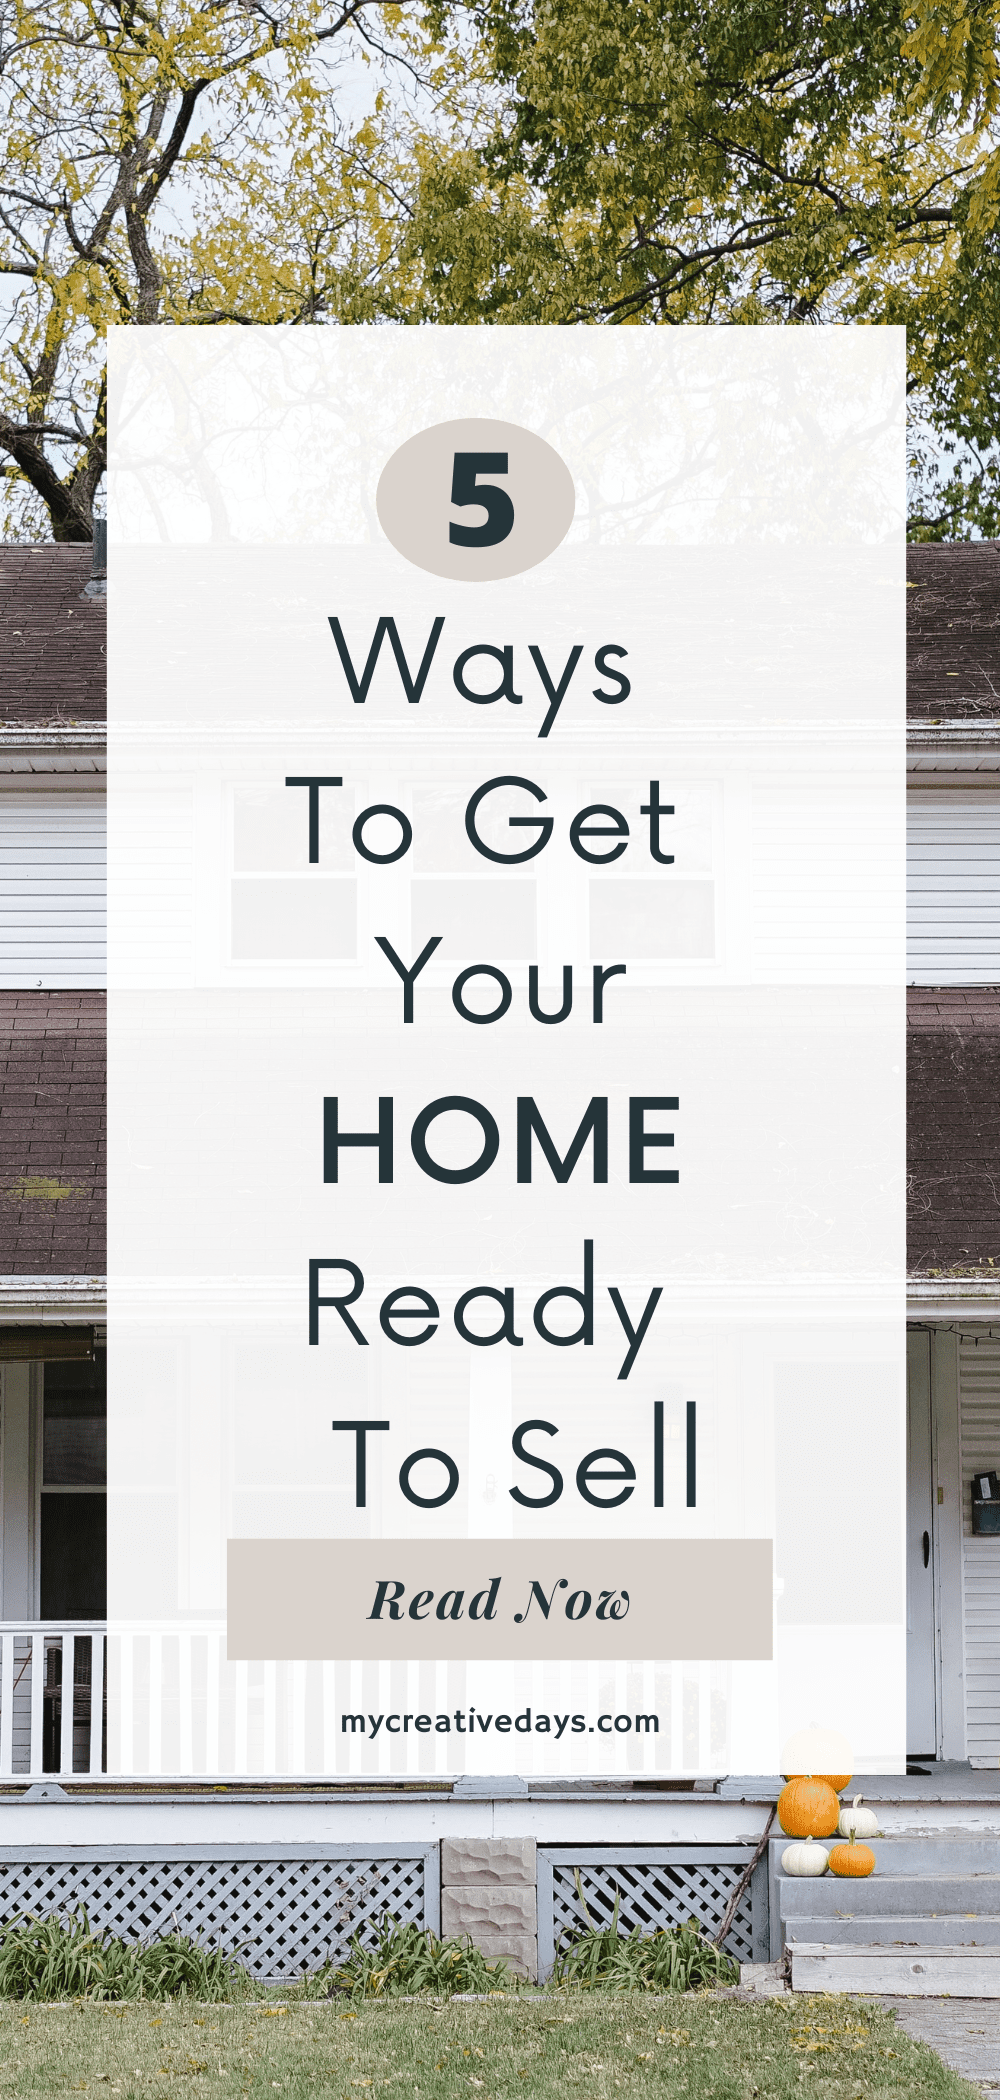 If you are looking to sell your own home or a home you flipped, these 5 Ways To Get Your Home Ready To Sell will make the process successful.